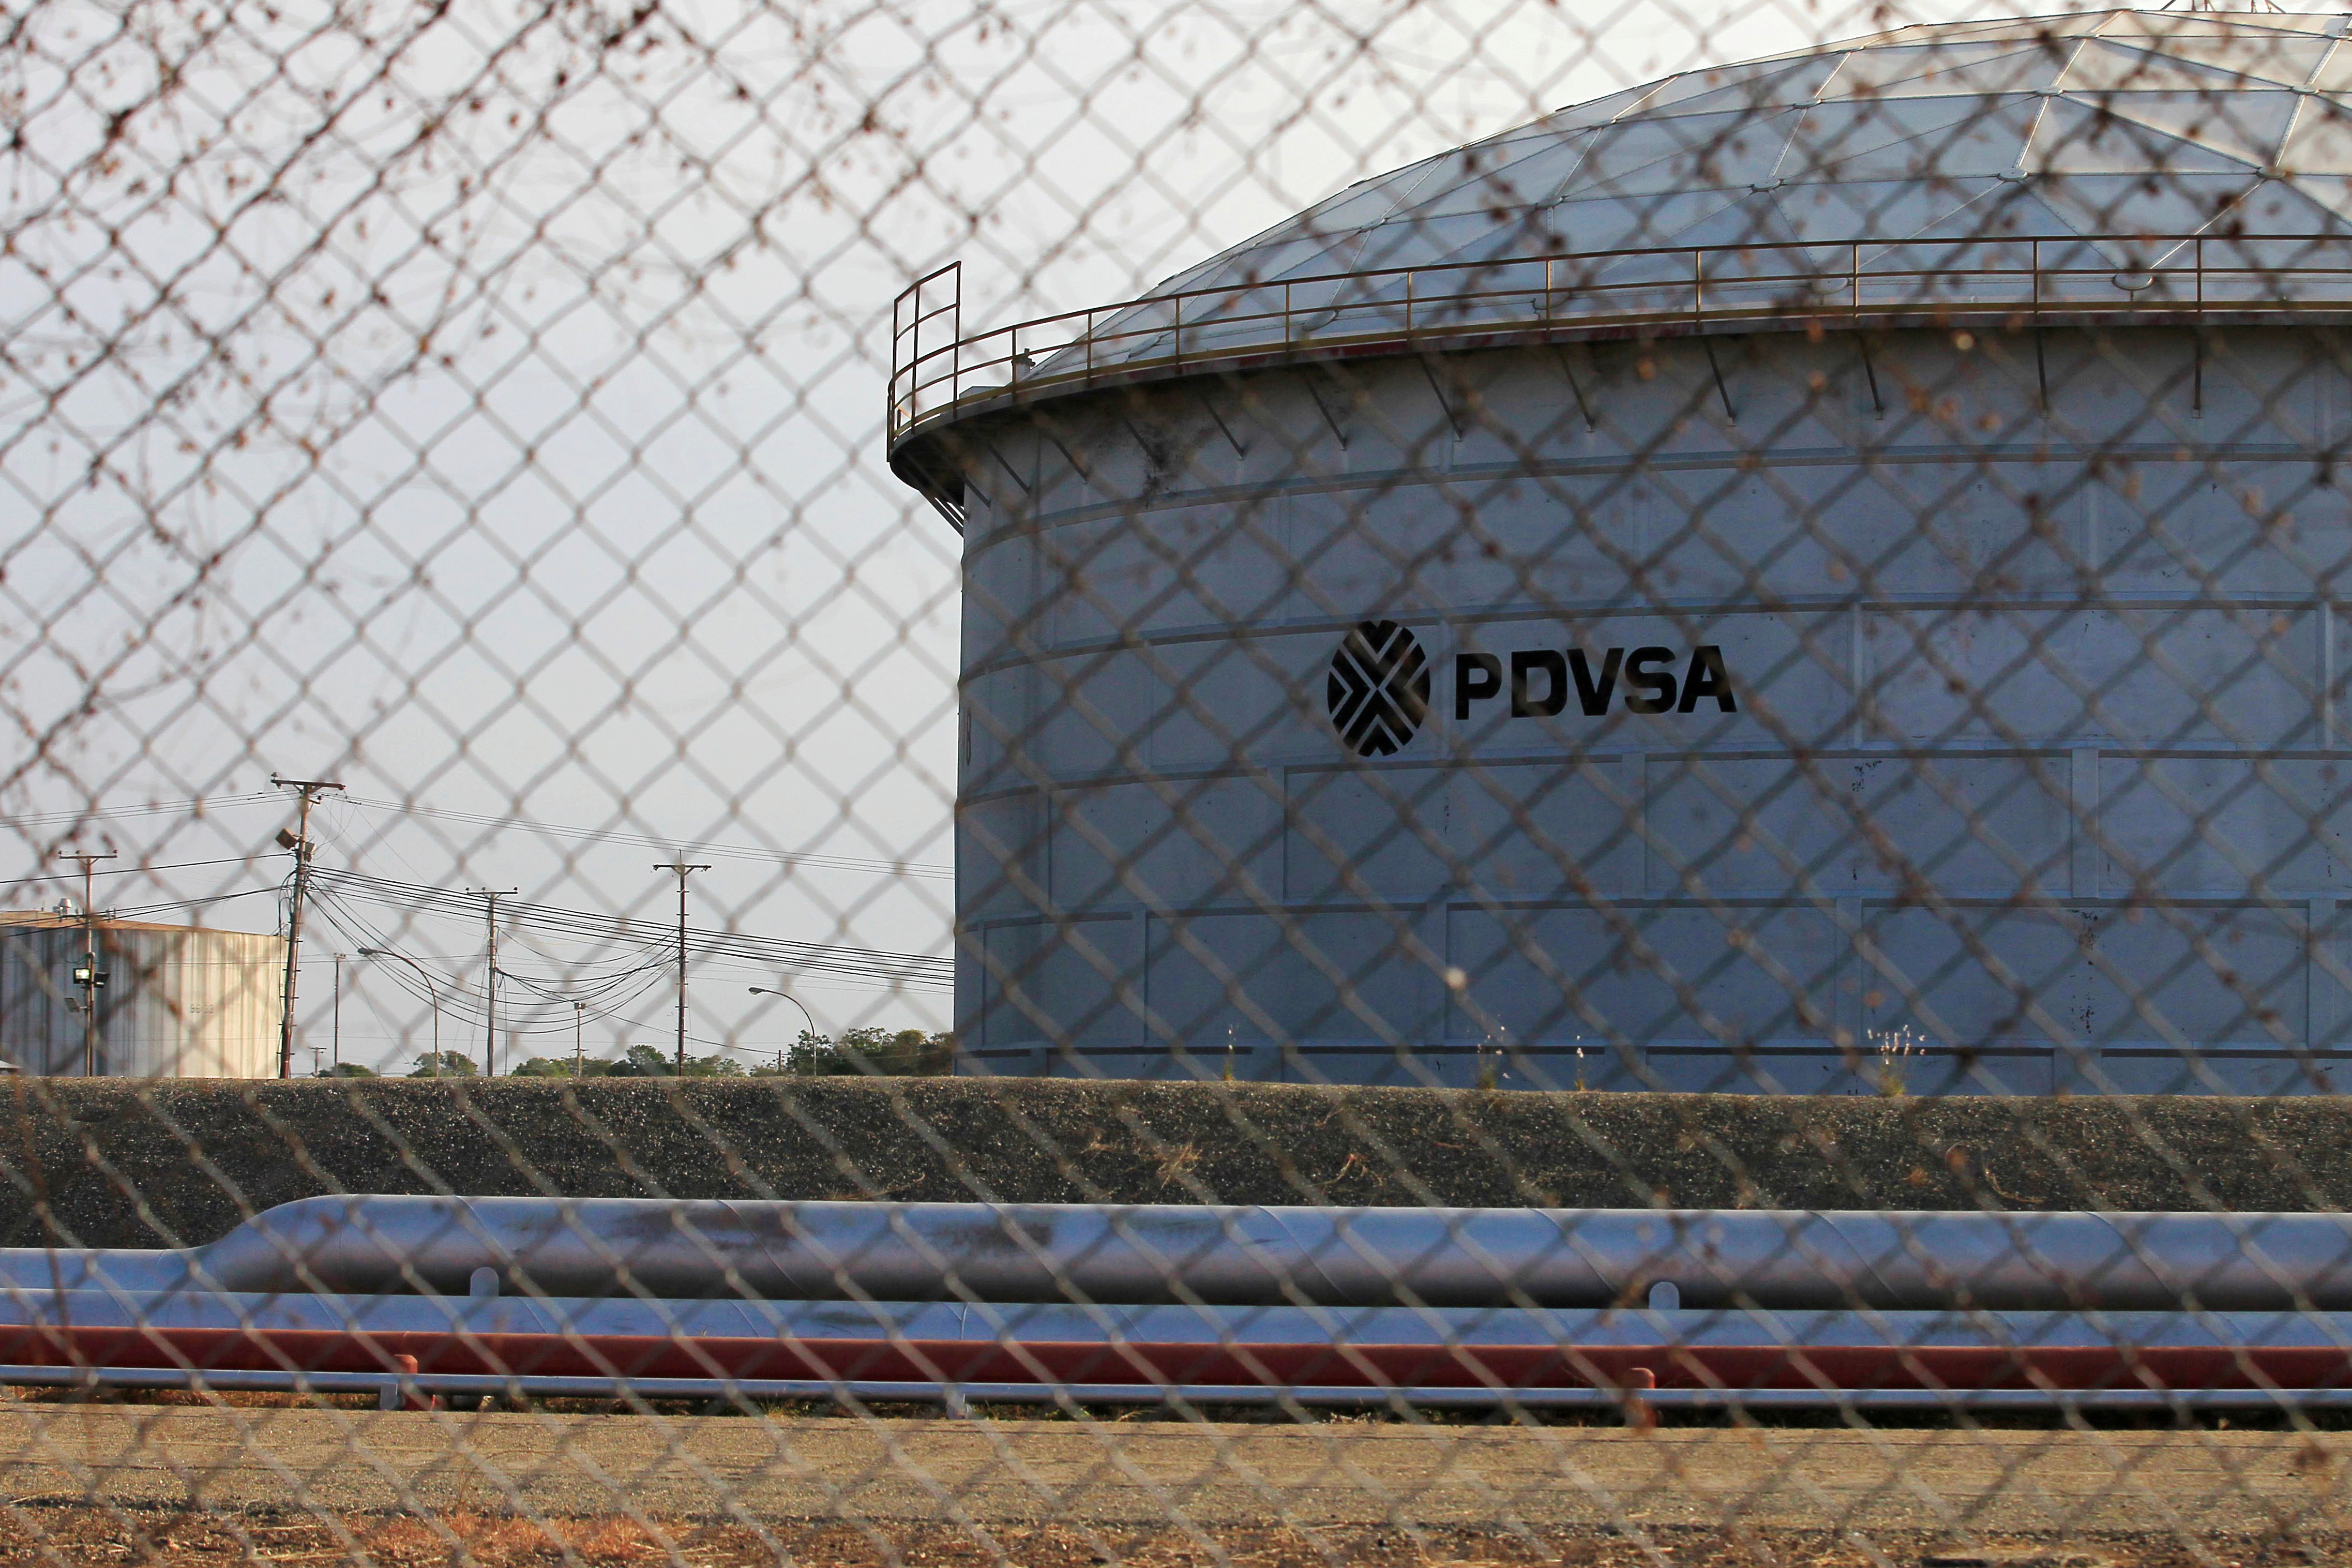 The corporate logo of state oil company PDVSA is seen on a tank at an oil facility in Lagunillas